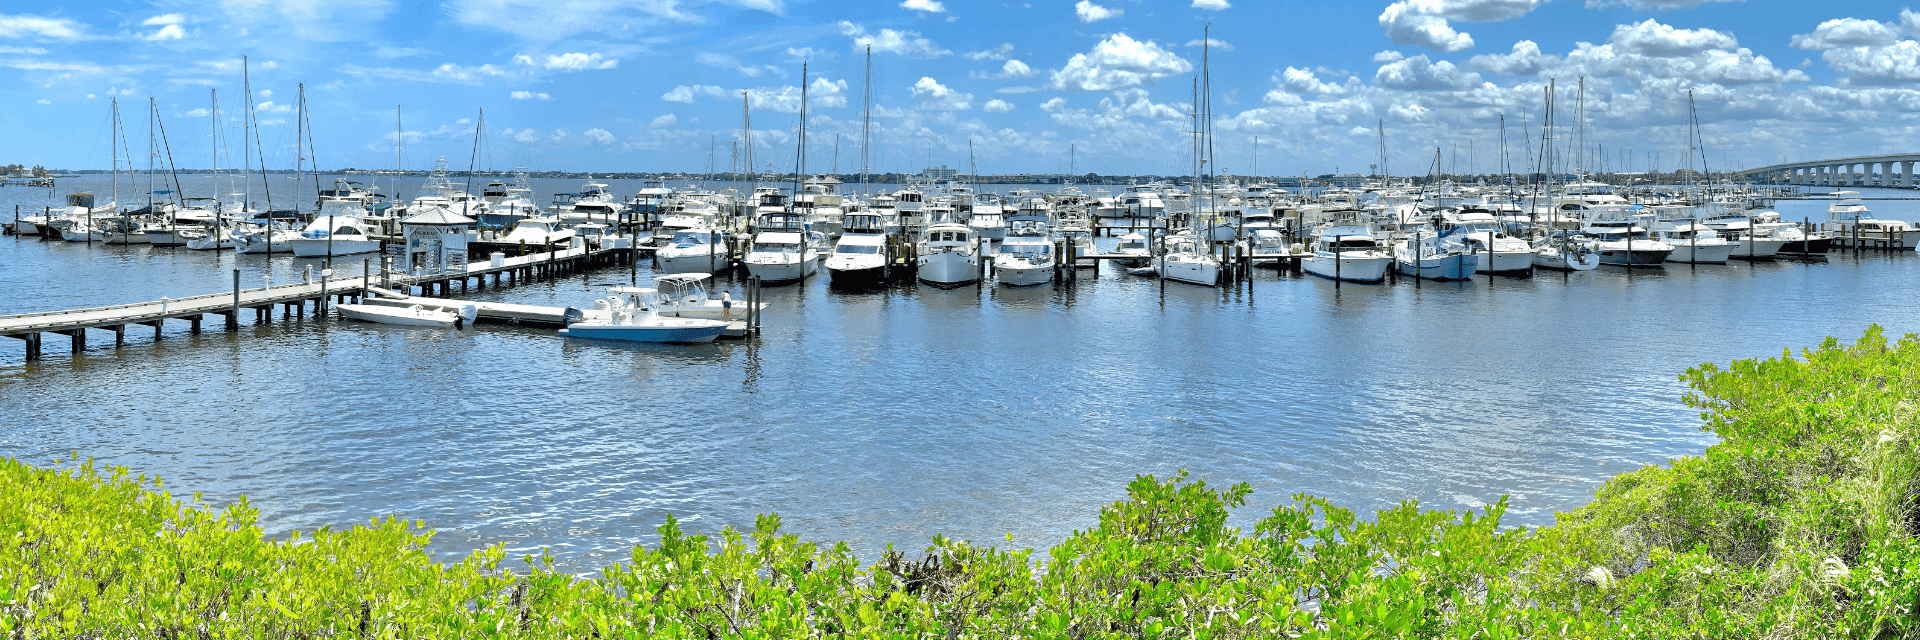 St Lucie River in Martin County, FL